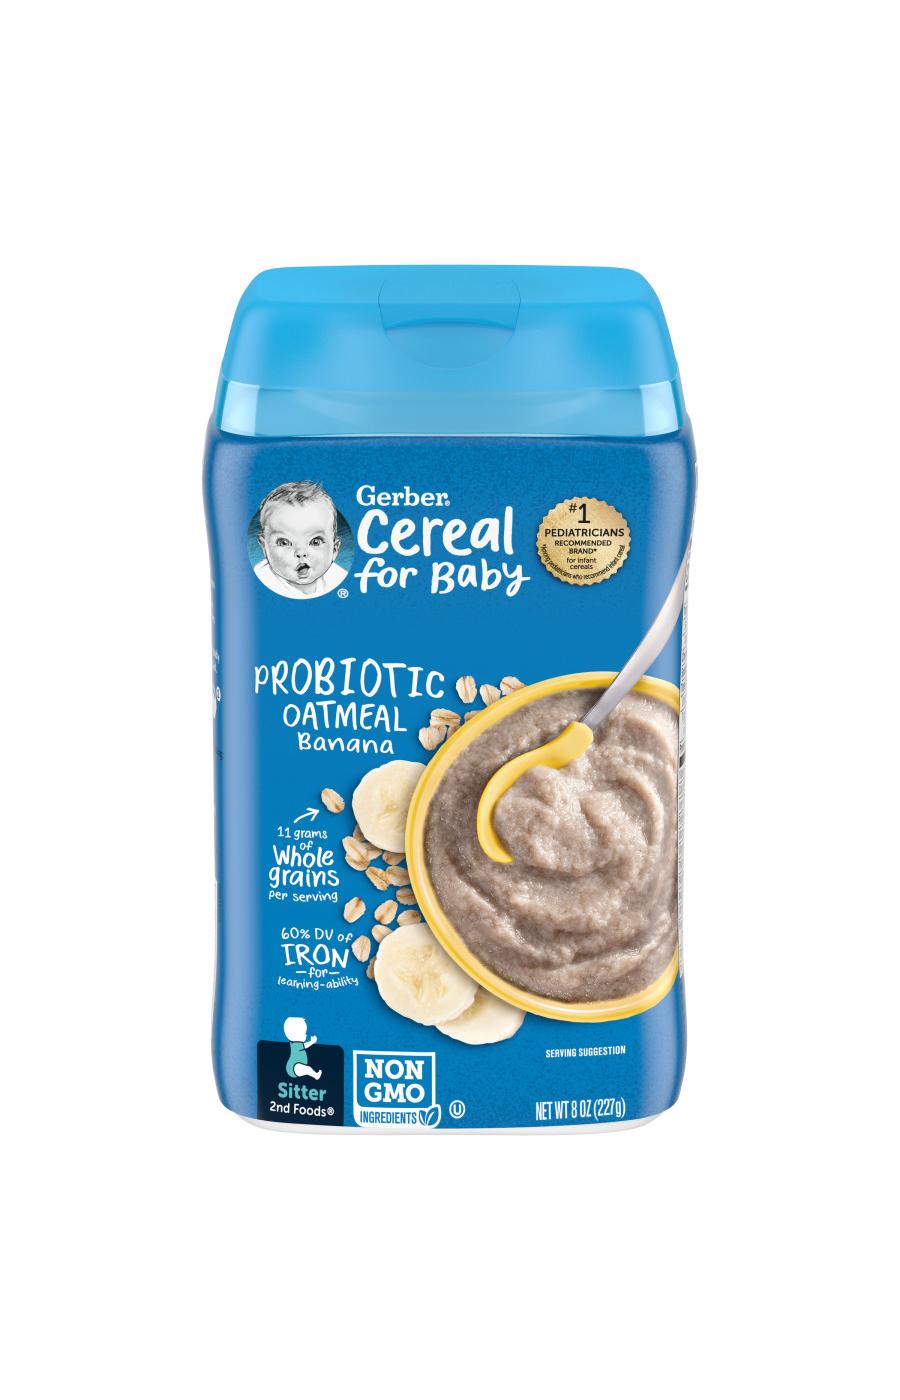 Gerber Cereal for Baby Probiotic Oatmeal - Banana; image 1 of 8